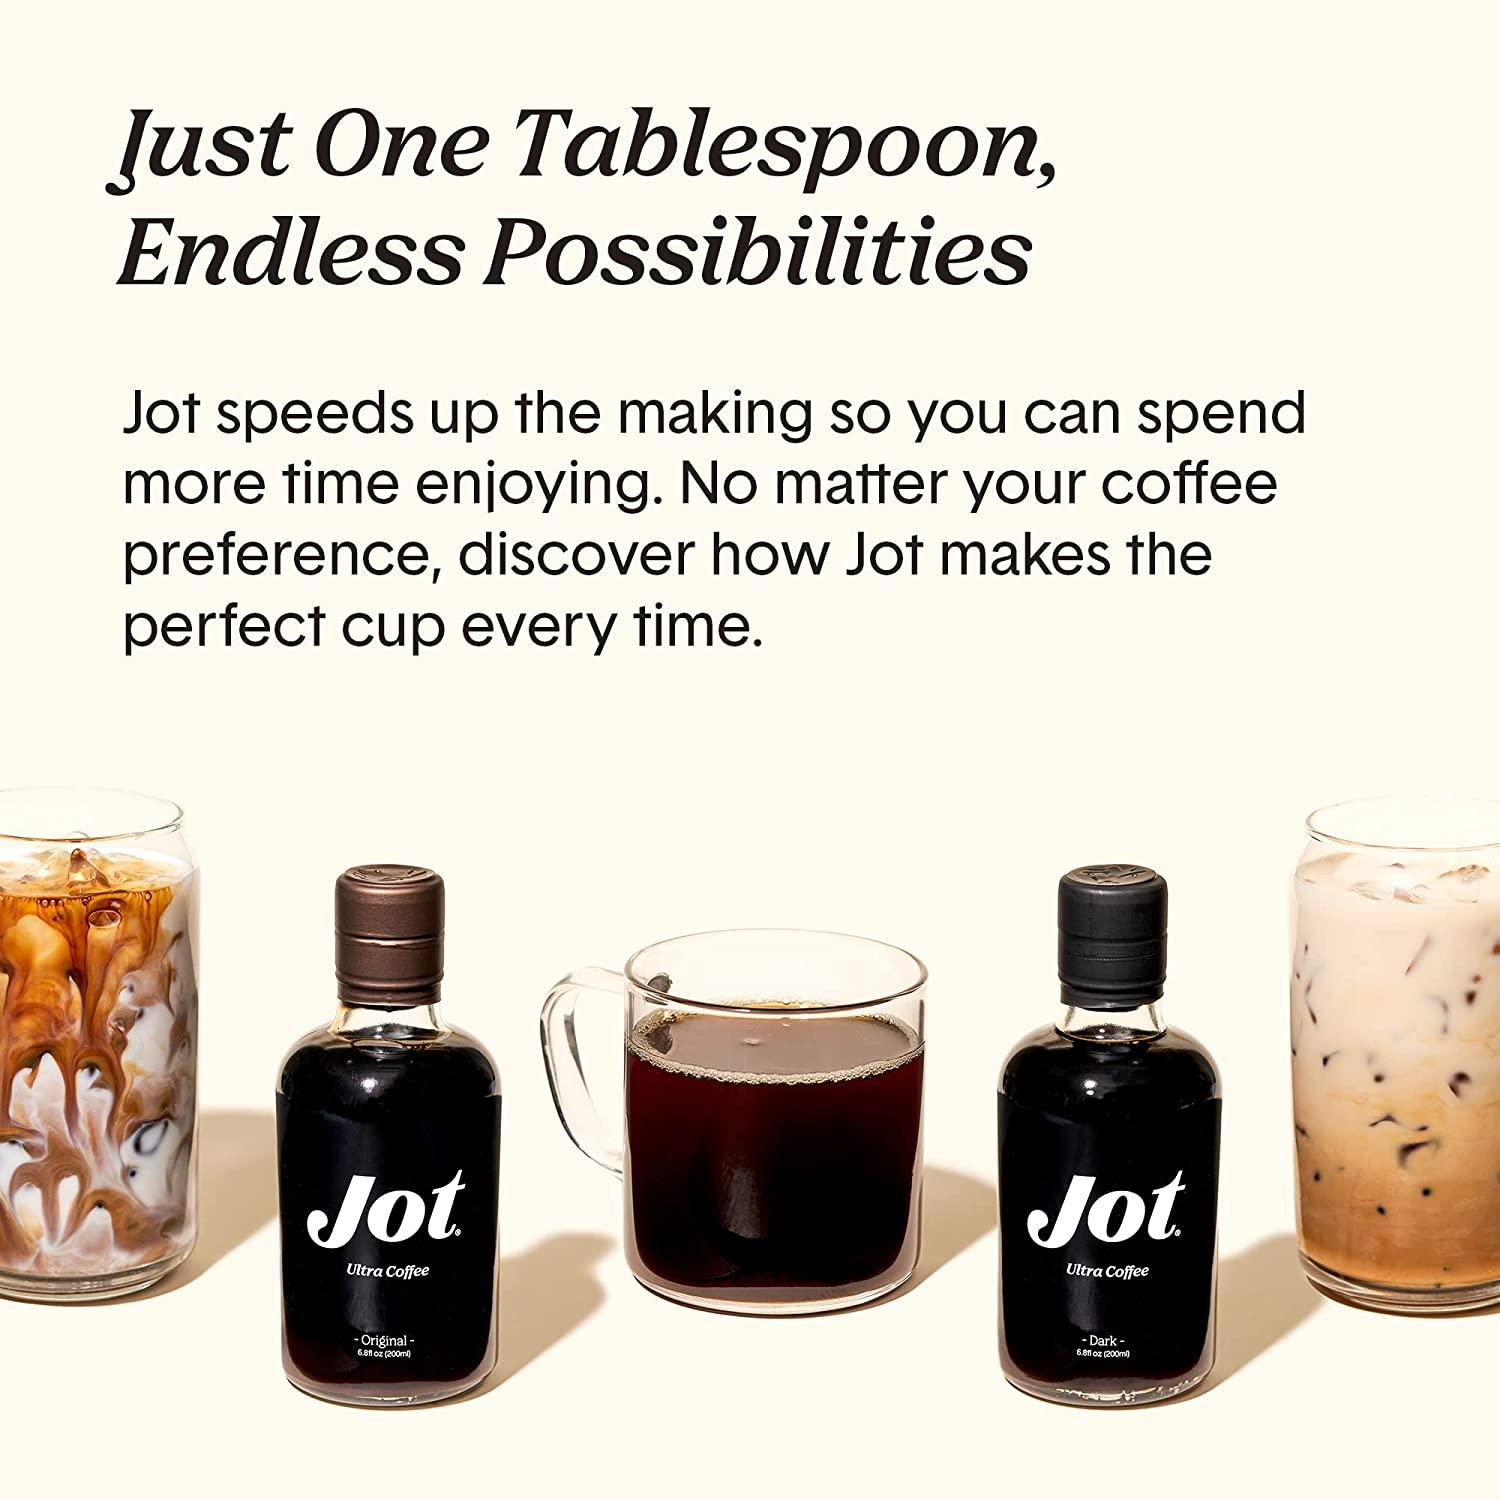 5 Delicious Reasons To Try Jot Ultra Concentrated Coffee and 25